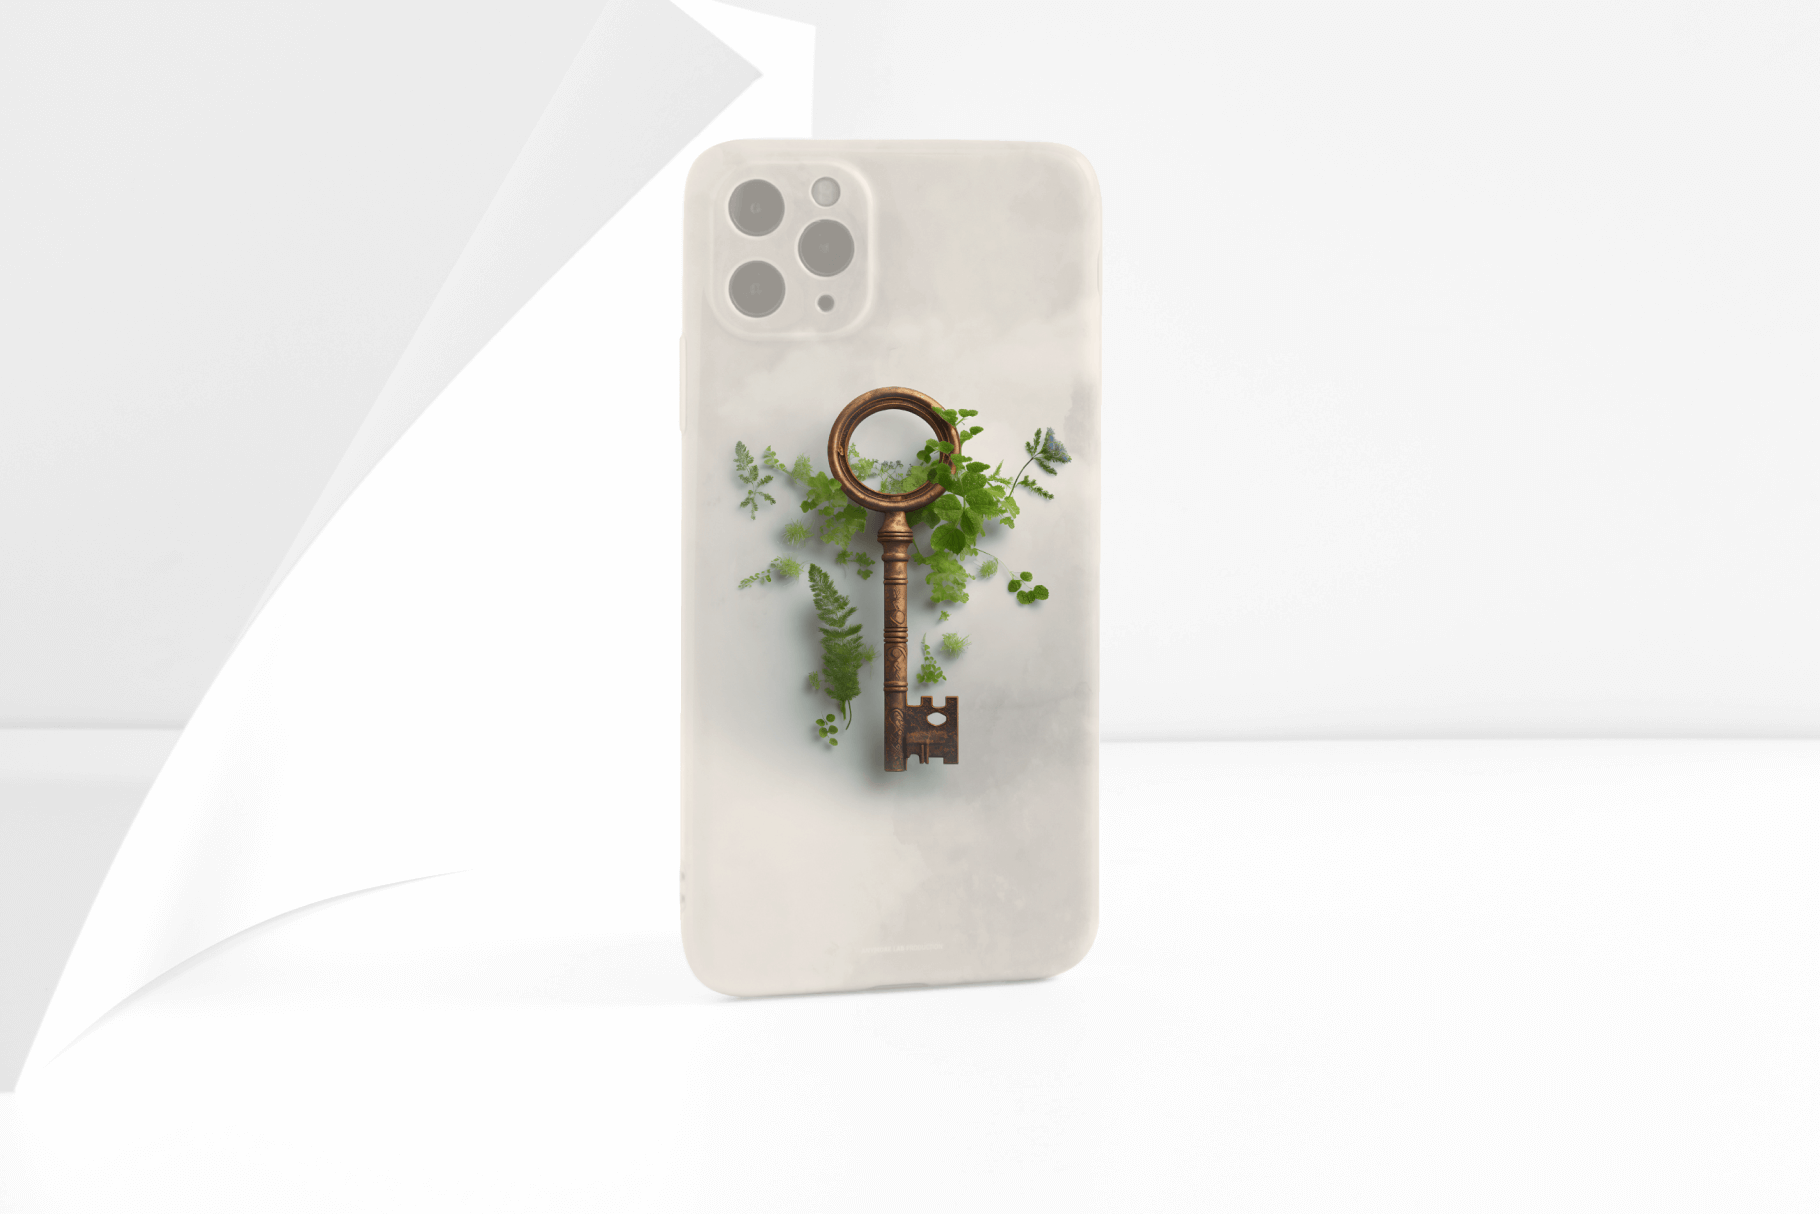 Phone case showcasing an antique key with ivy elements